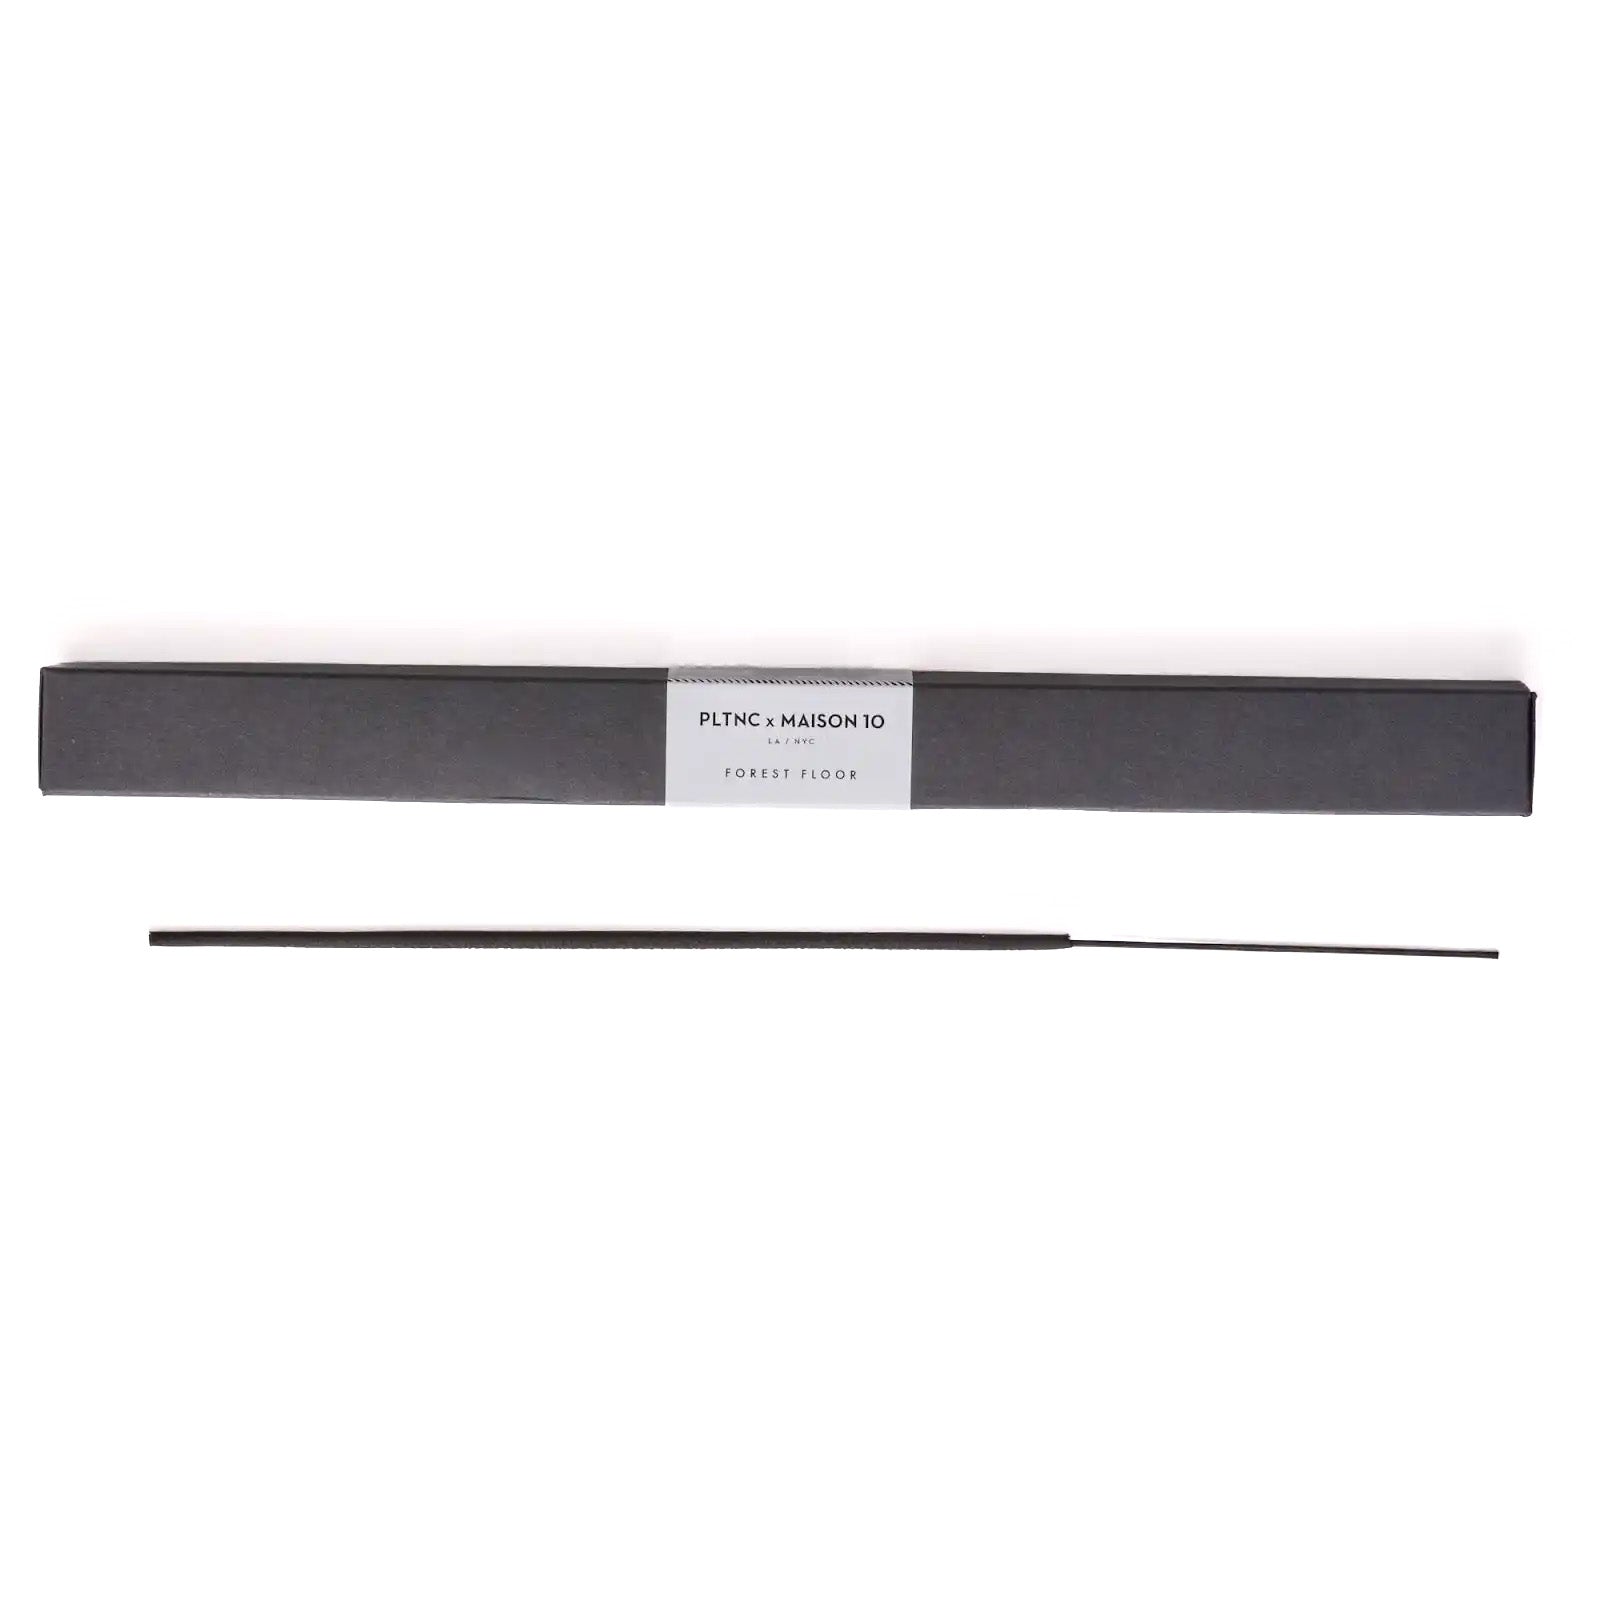 Aroma therapy incense sticks in a minimalistic black packaging